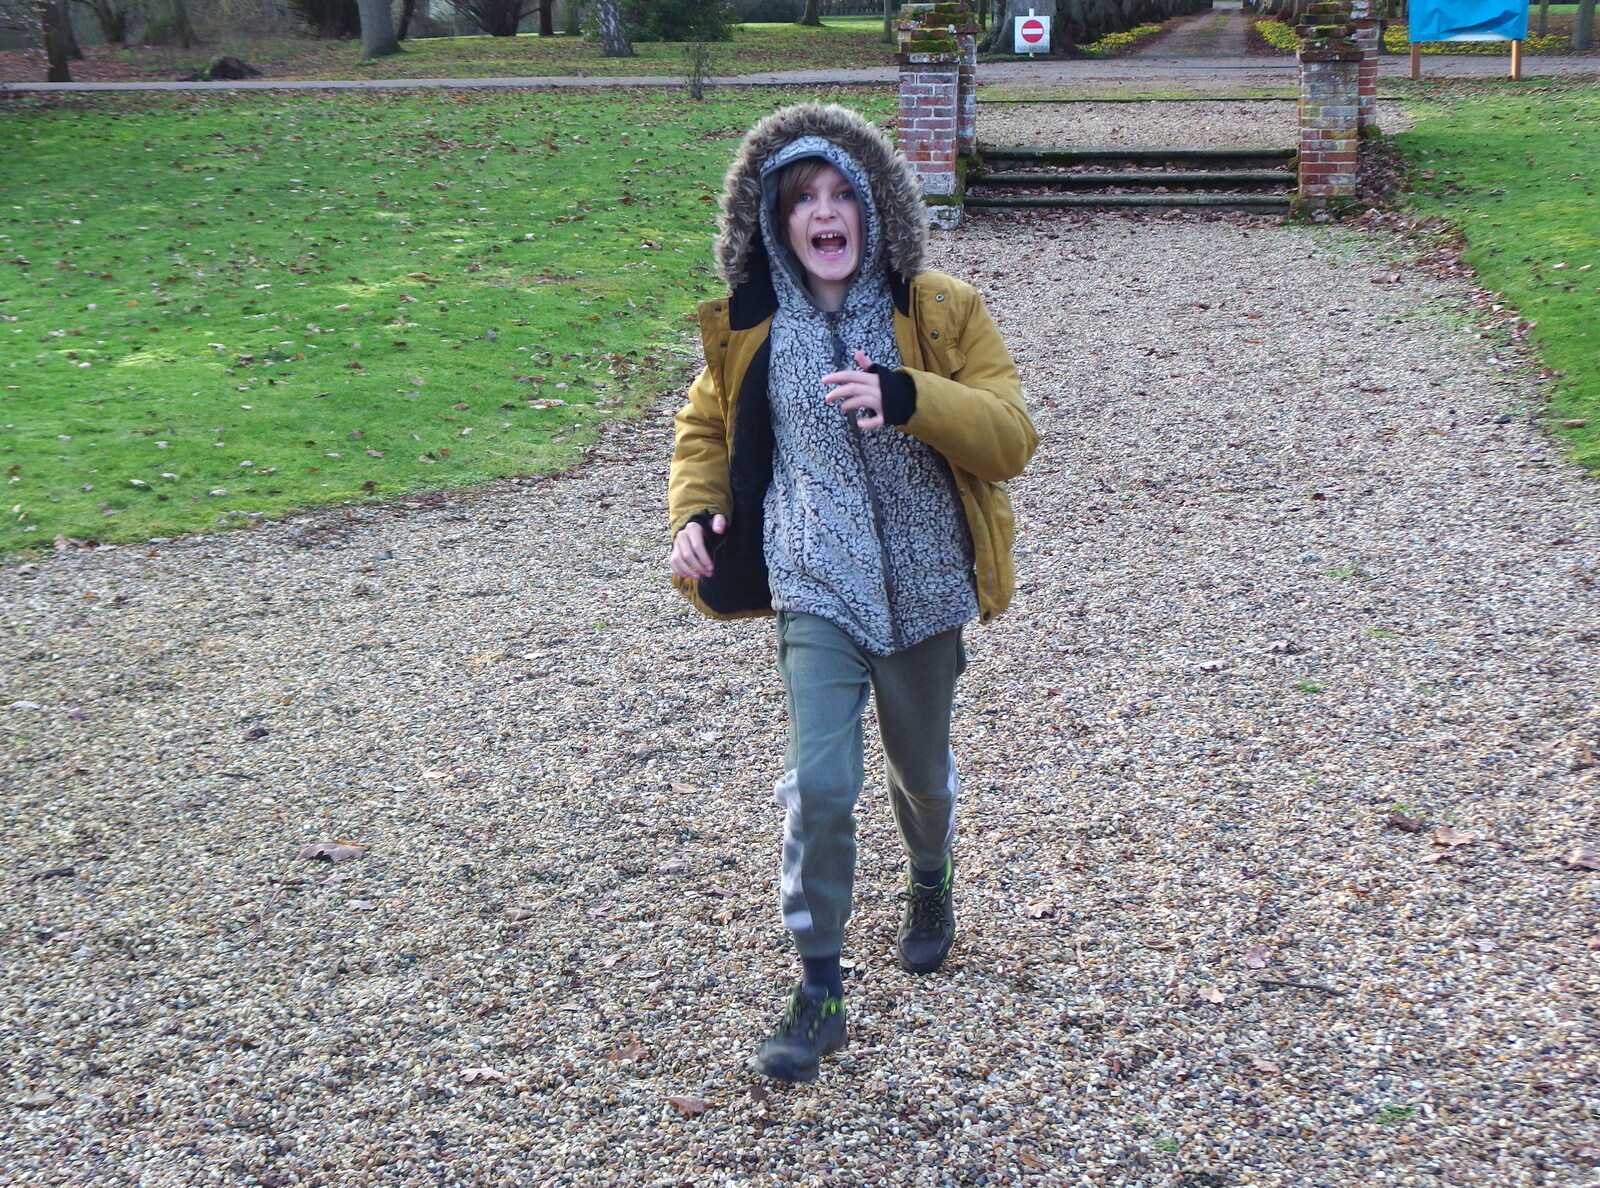 Harry runs around outside in the Oaksmere from A Trip to Ampersand, Sawmills Road, Diss - 27th January 2023